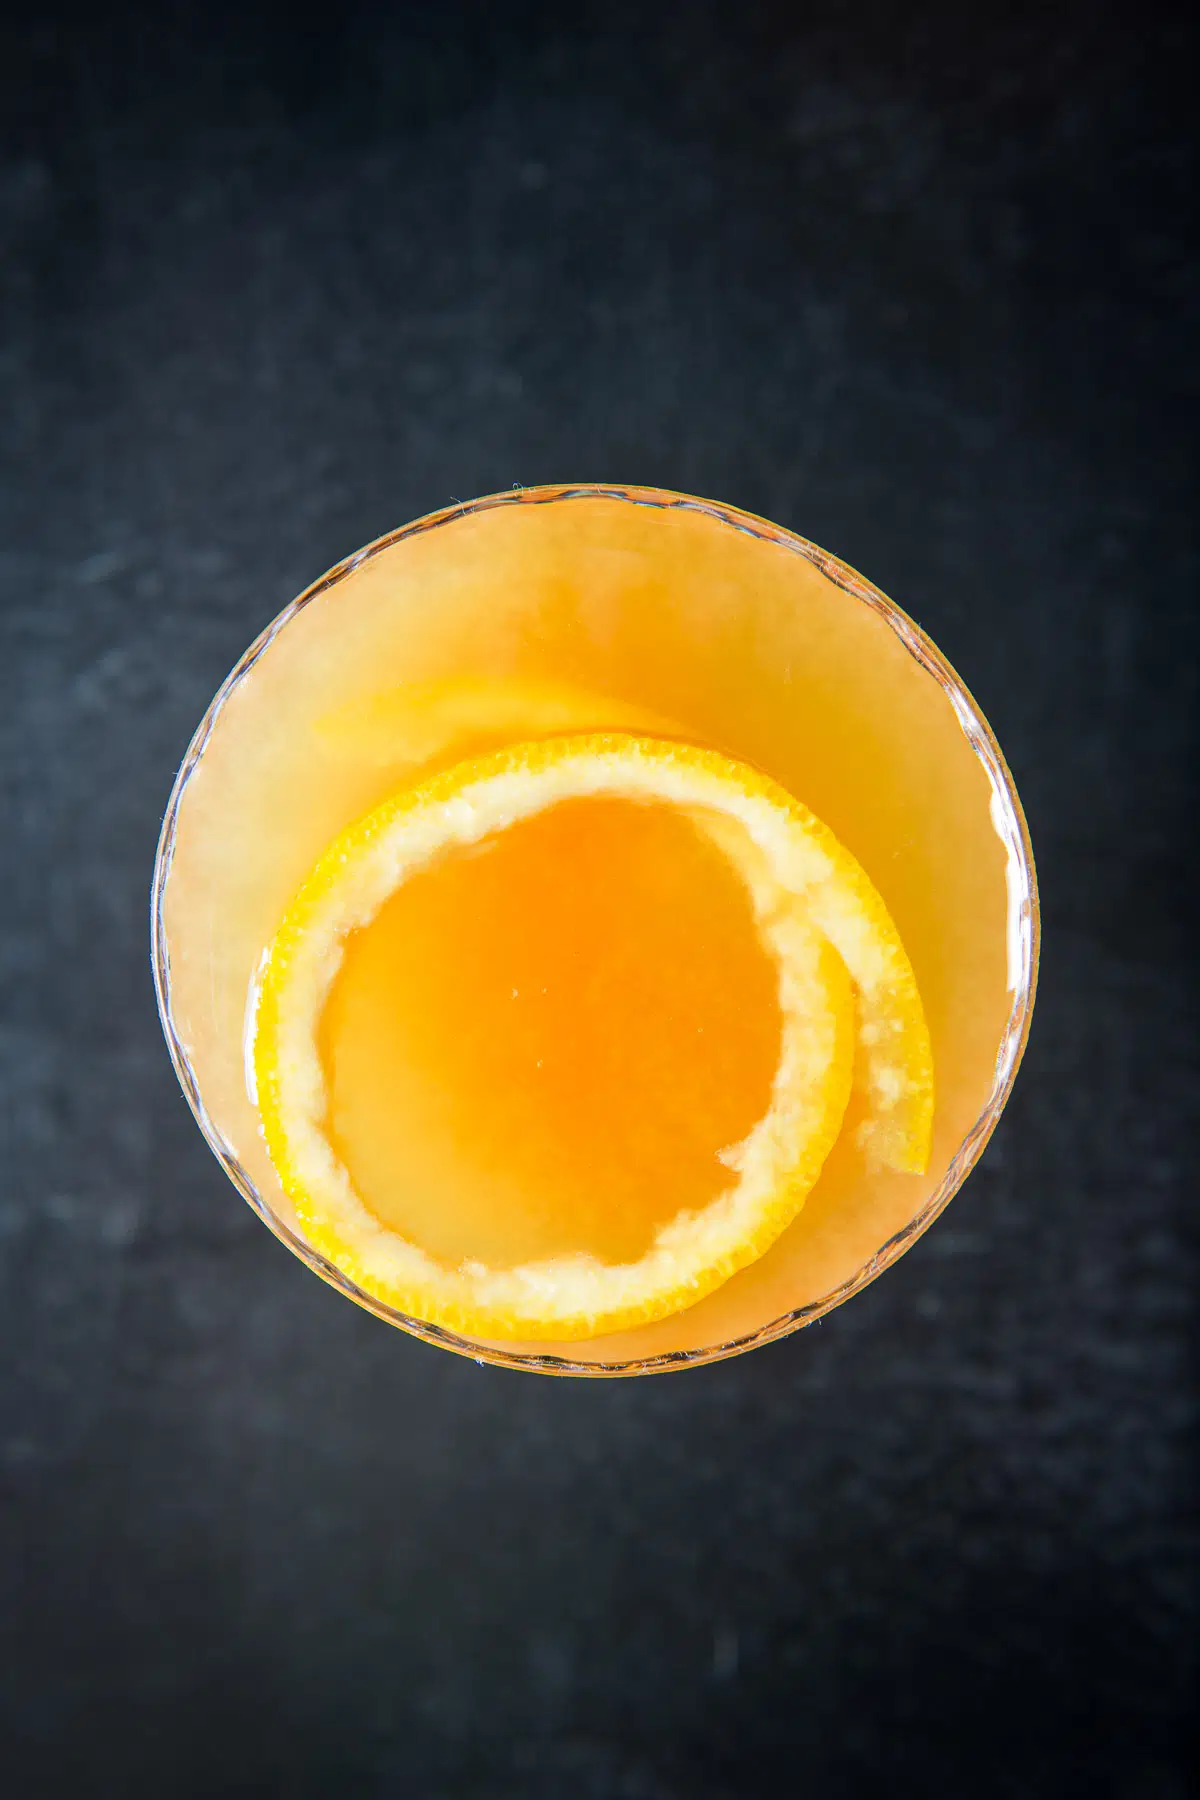 Overhead view of the orange rind floating in the orange drink